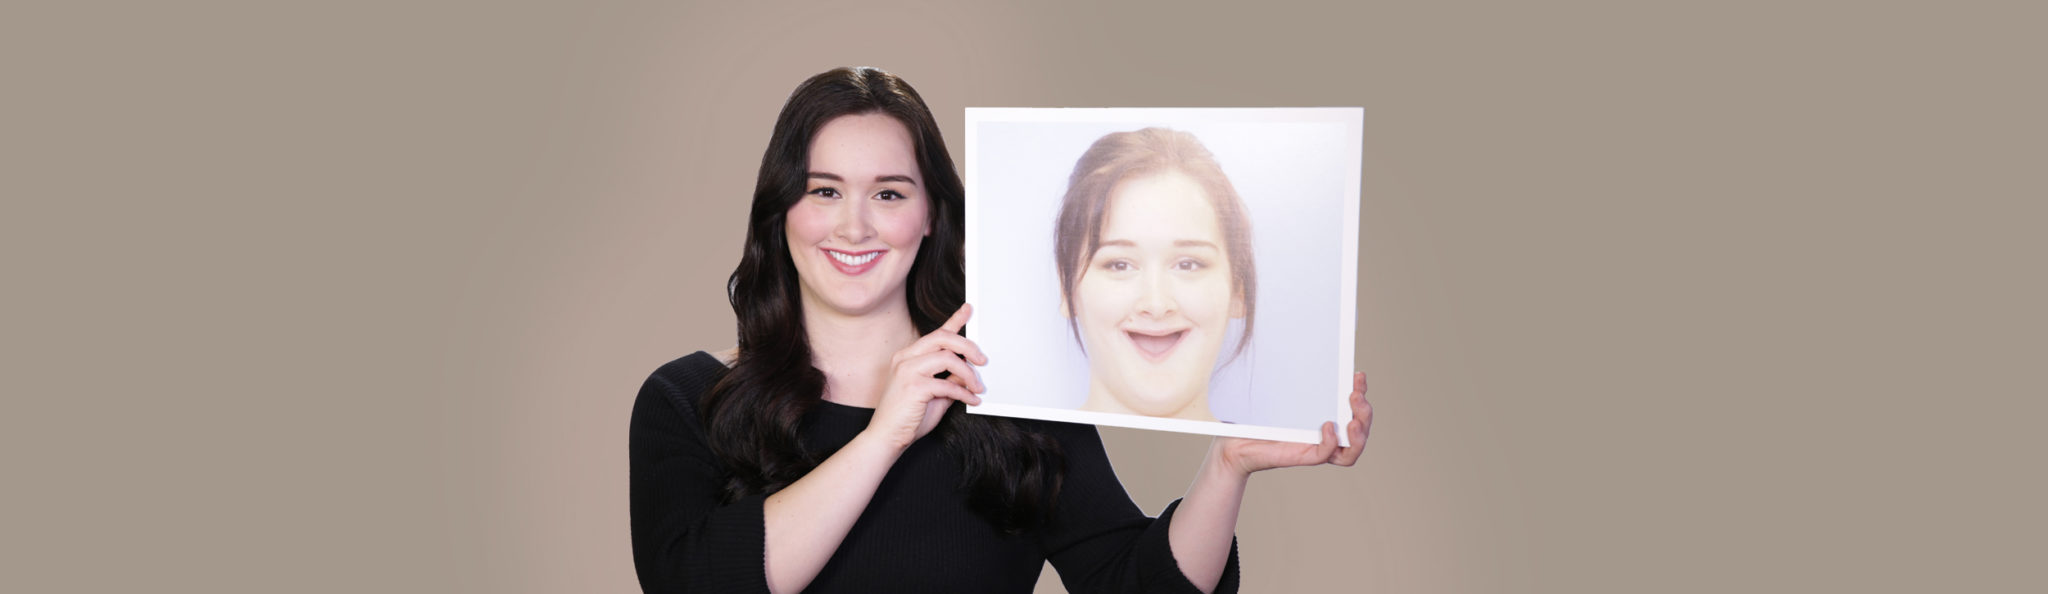 Bone Loss Patient With Zygomatic Dental Implants Surgery holds her before photo